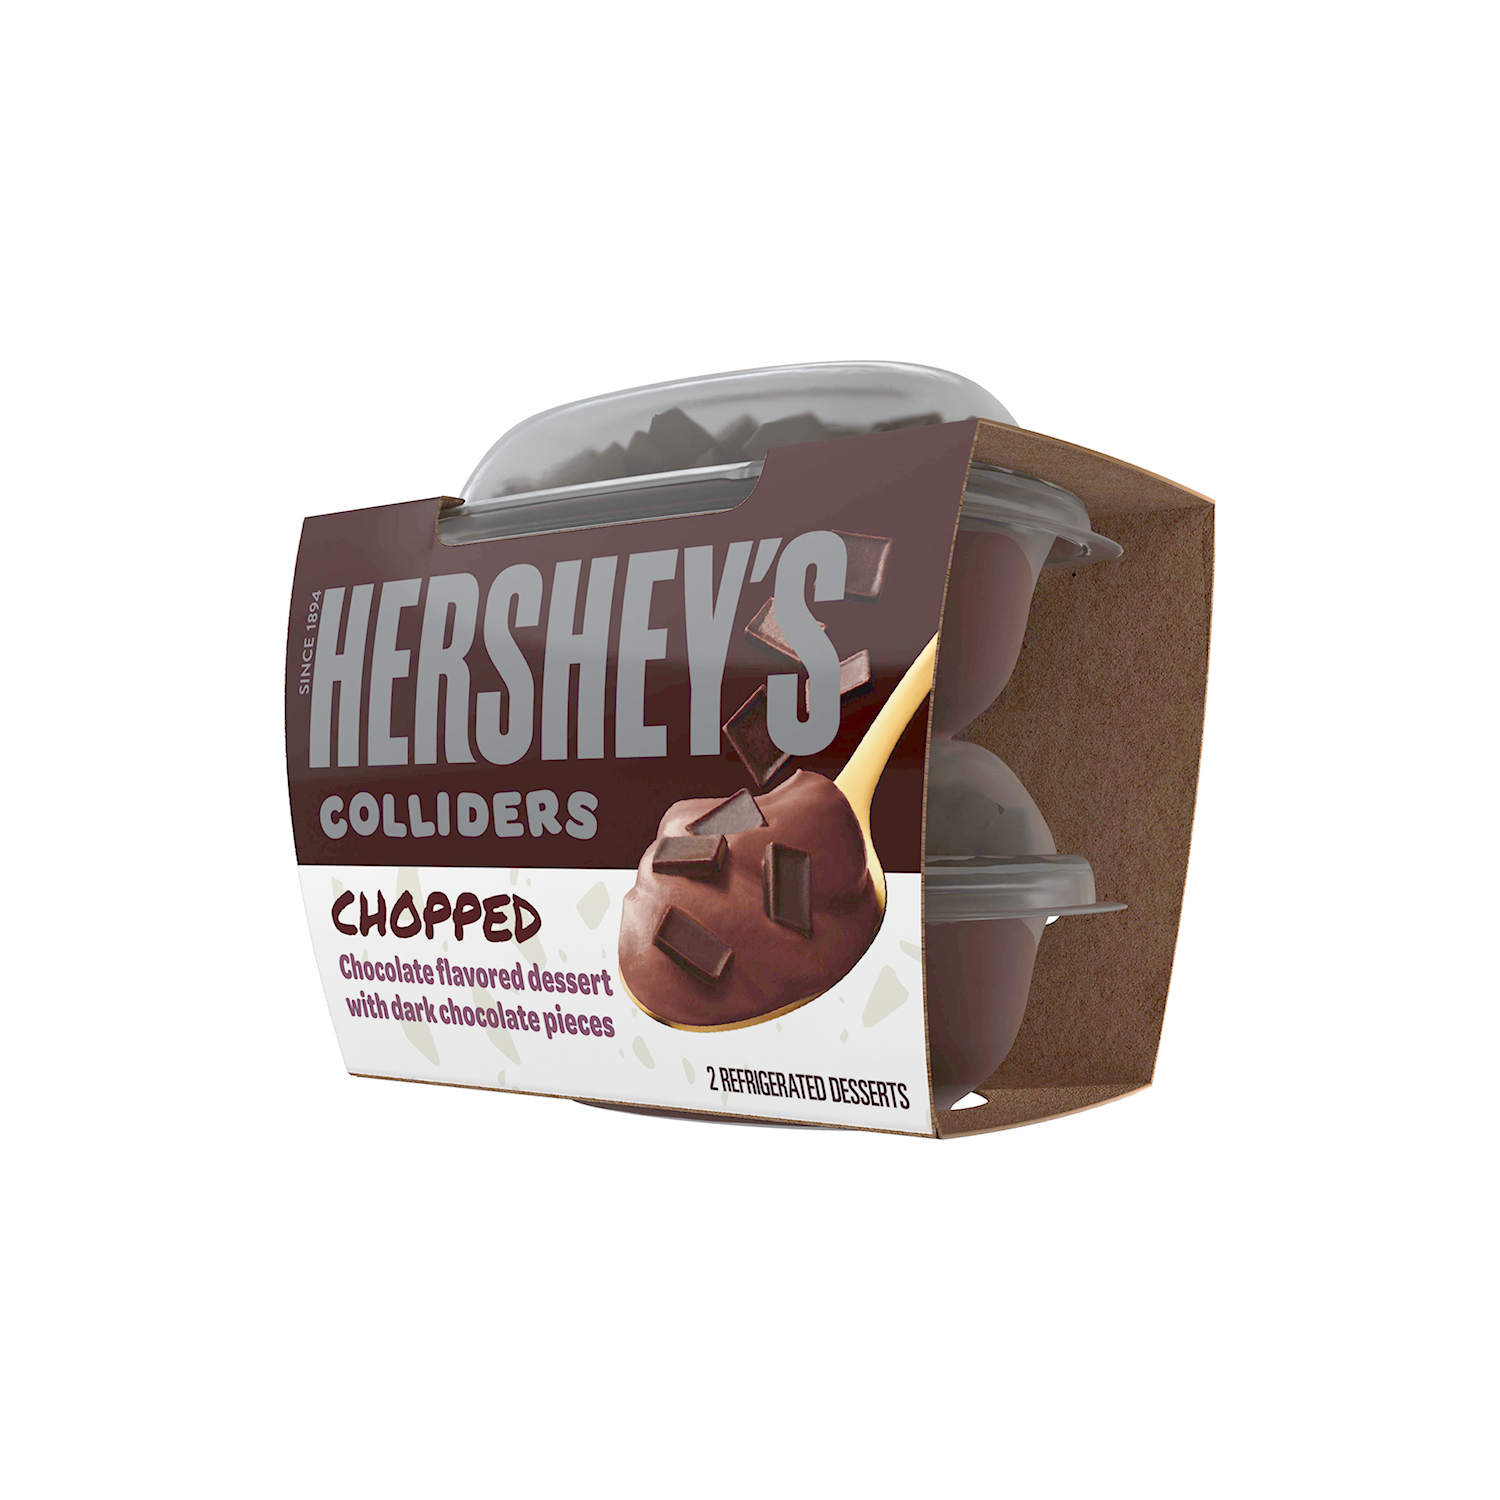 HERSHEY'S COLLIDERS™ Chopped Chocolate Dessert, 7 oz, 2 pack - Right of Package